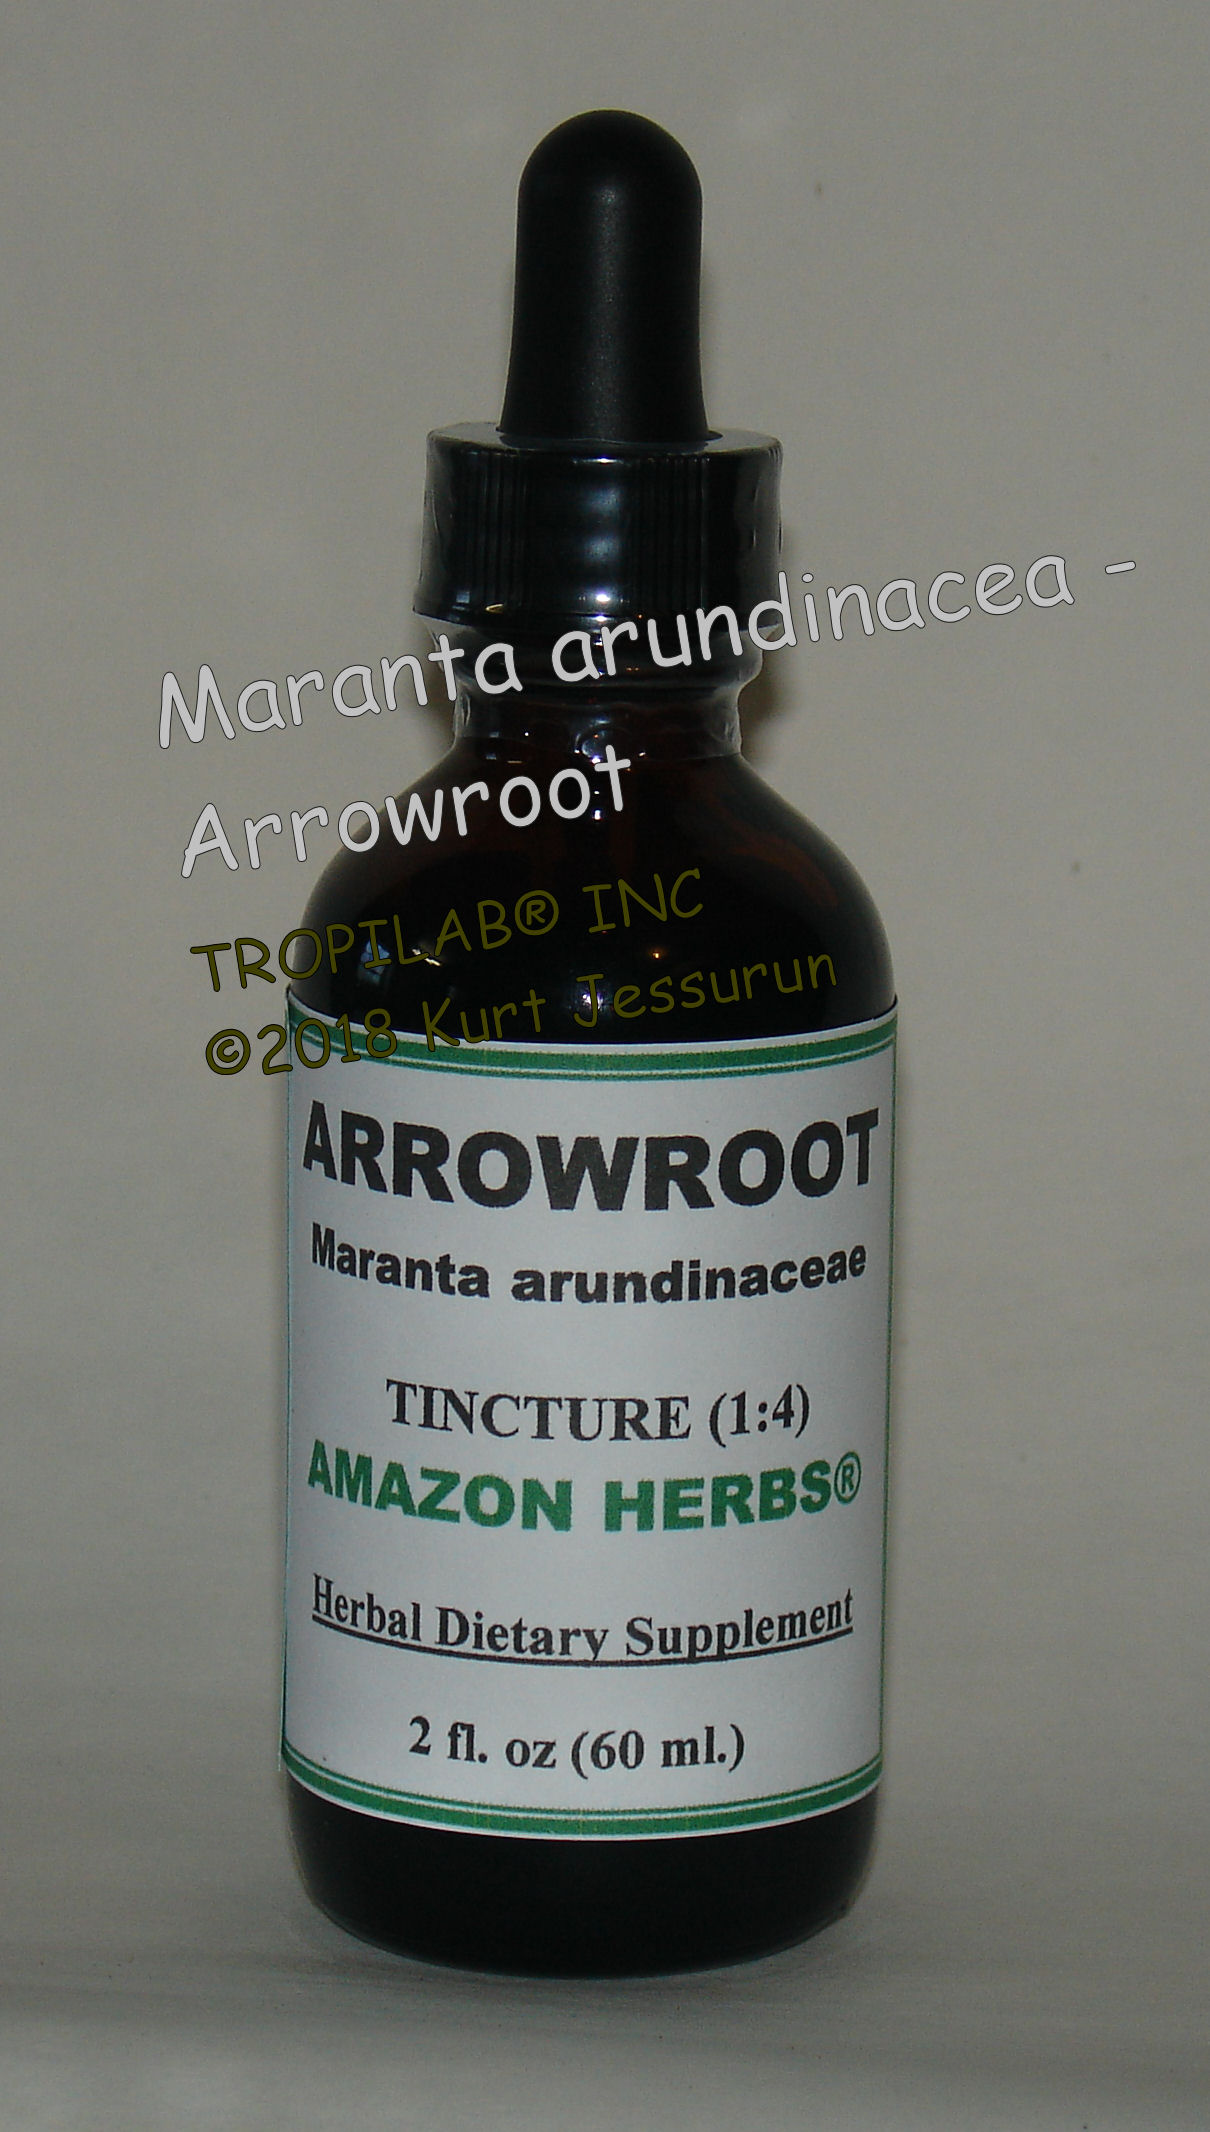 Maranta arundinacea - Arrowroot tincture.
It is a natural immune system booster and has powerful anti-inflammatory properties. Works naturally against intestinal disorders
 (acute diarrhea), and treats Urinary Tract Infections. It also improves the circulation and blood pressure; also lowers cholesterol.